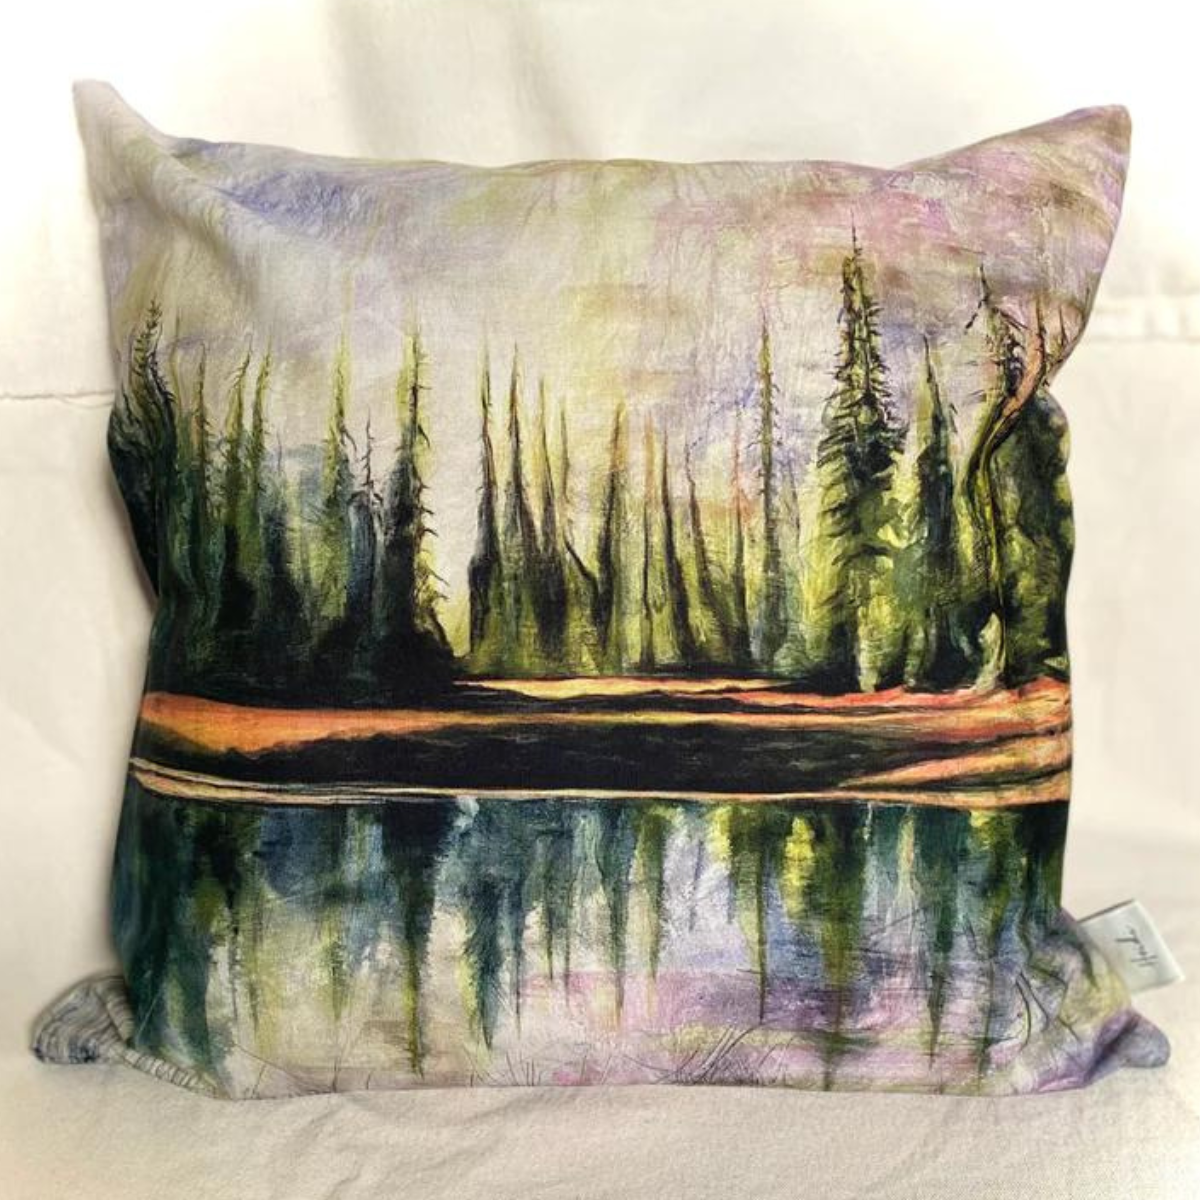 Cotton Canvas Pillow Case - Glow Woods by Heidi The Artist